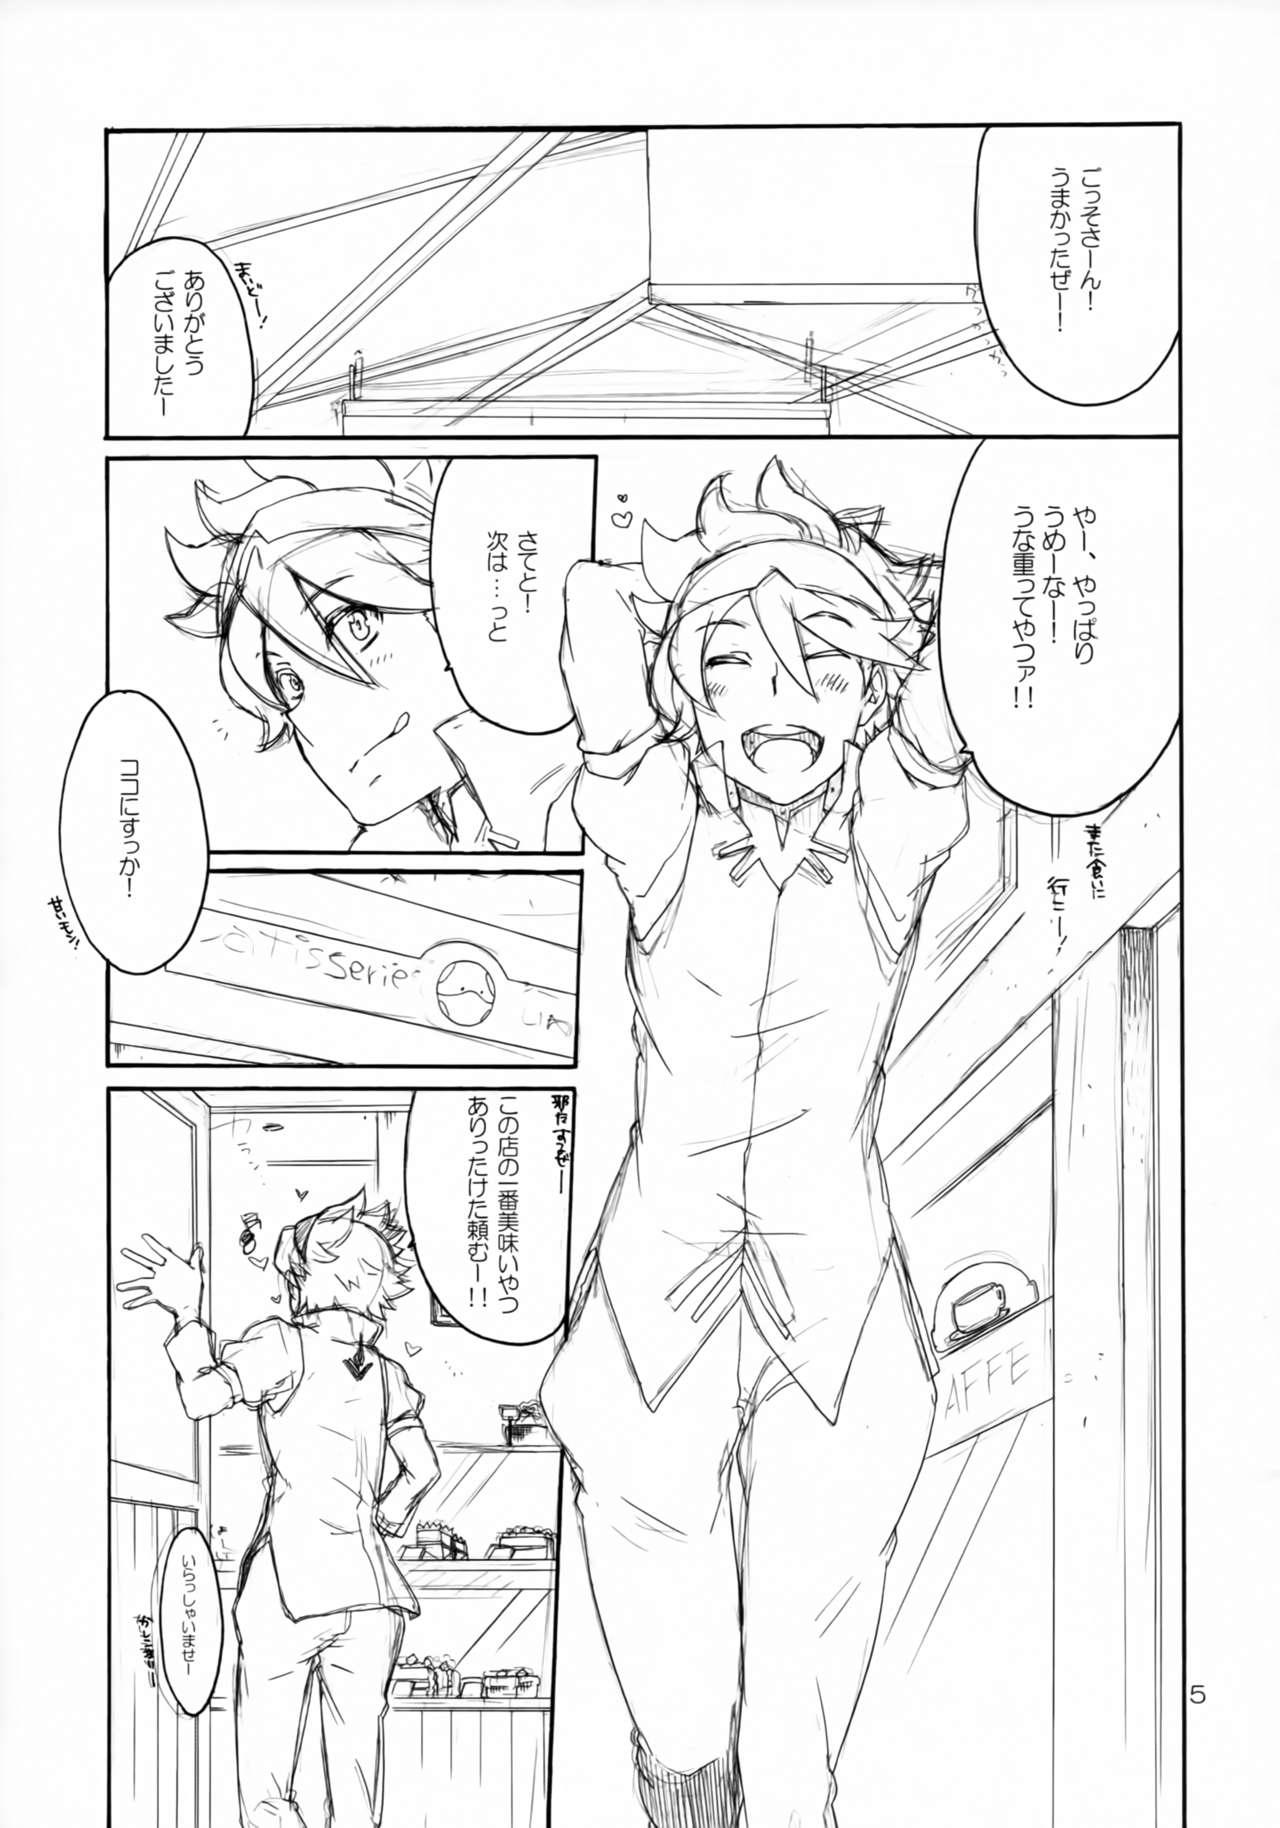 Masterbation sweets panic - Gundam build fighters Farting - Page 4